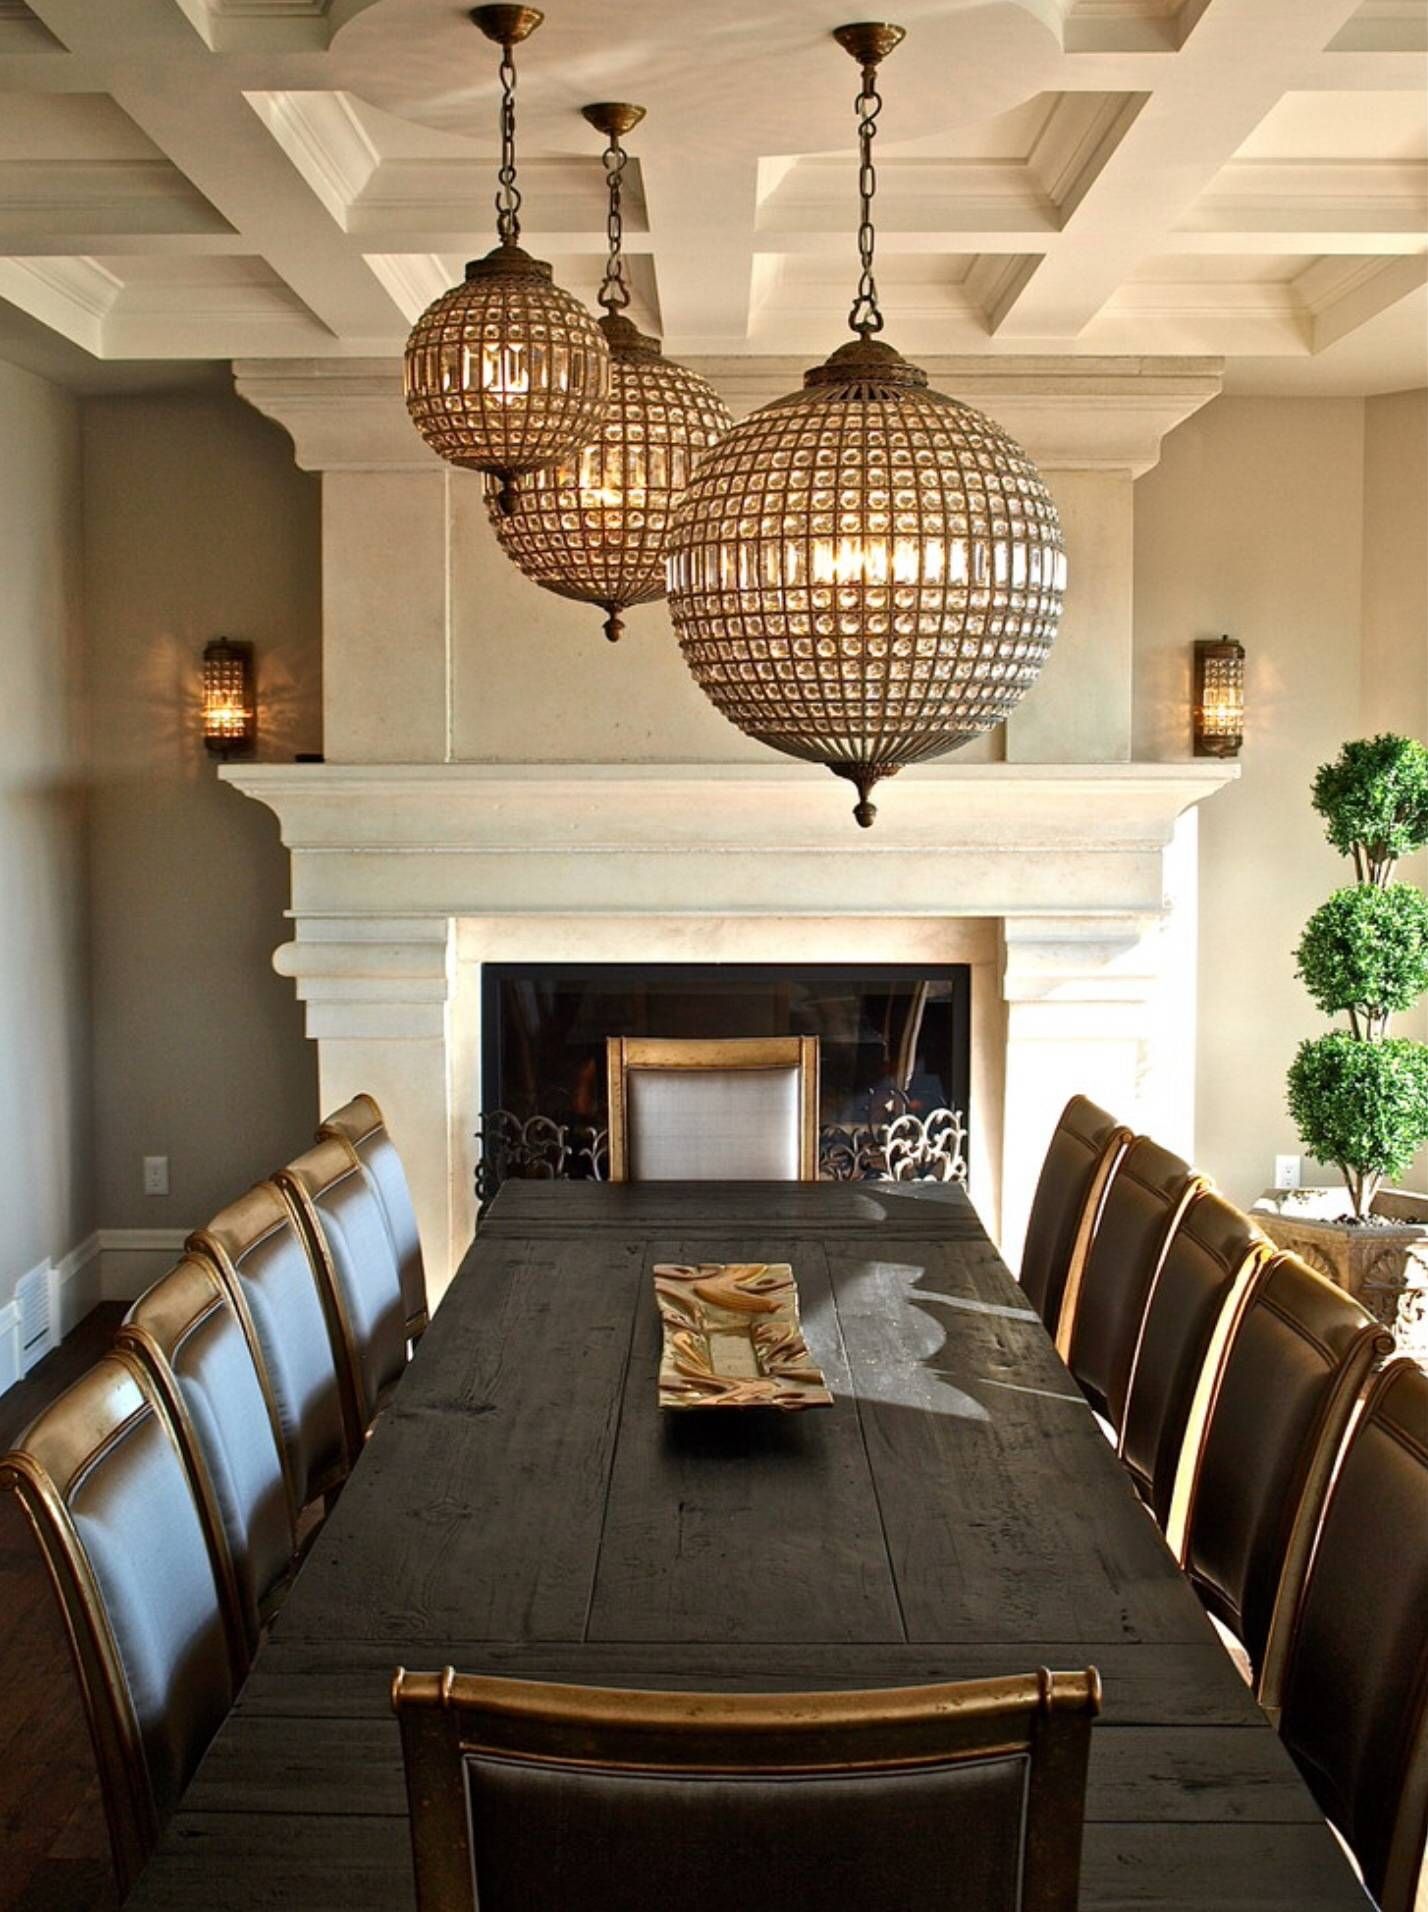 Restoration Hardware Light Fixtures All About House Design : How Intended For Restoration Hardware Pendant Lights (View 13 of 15)